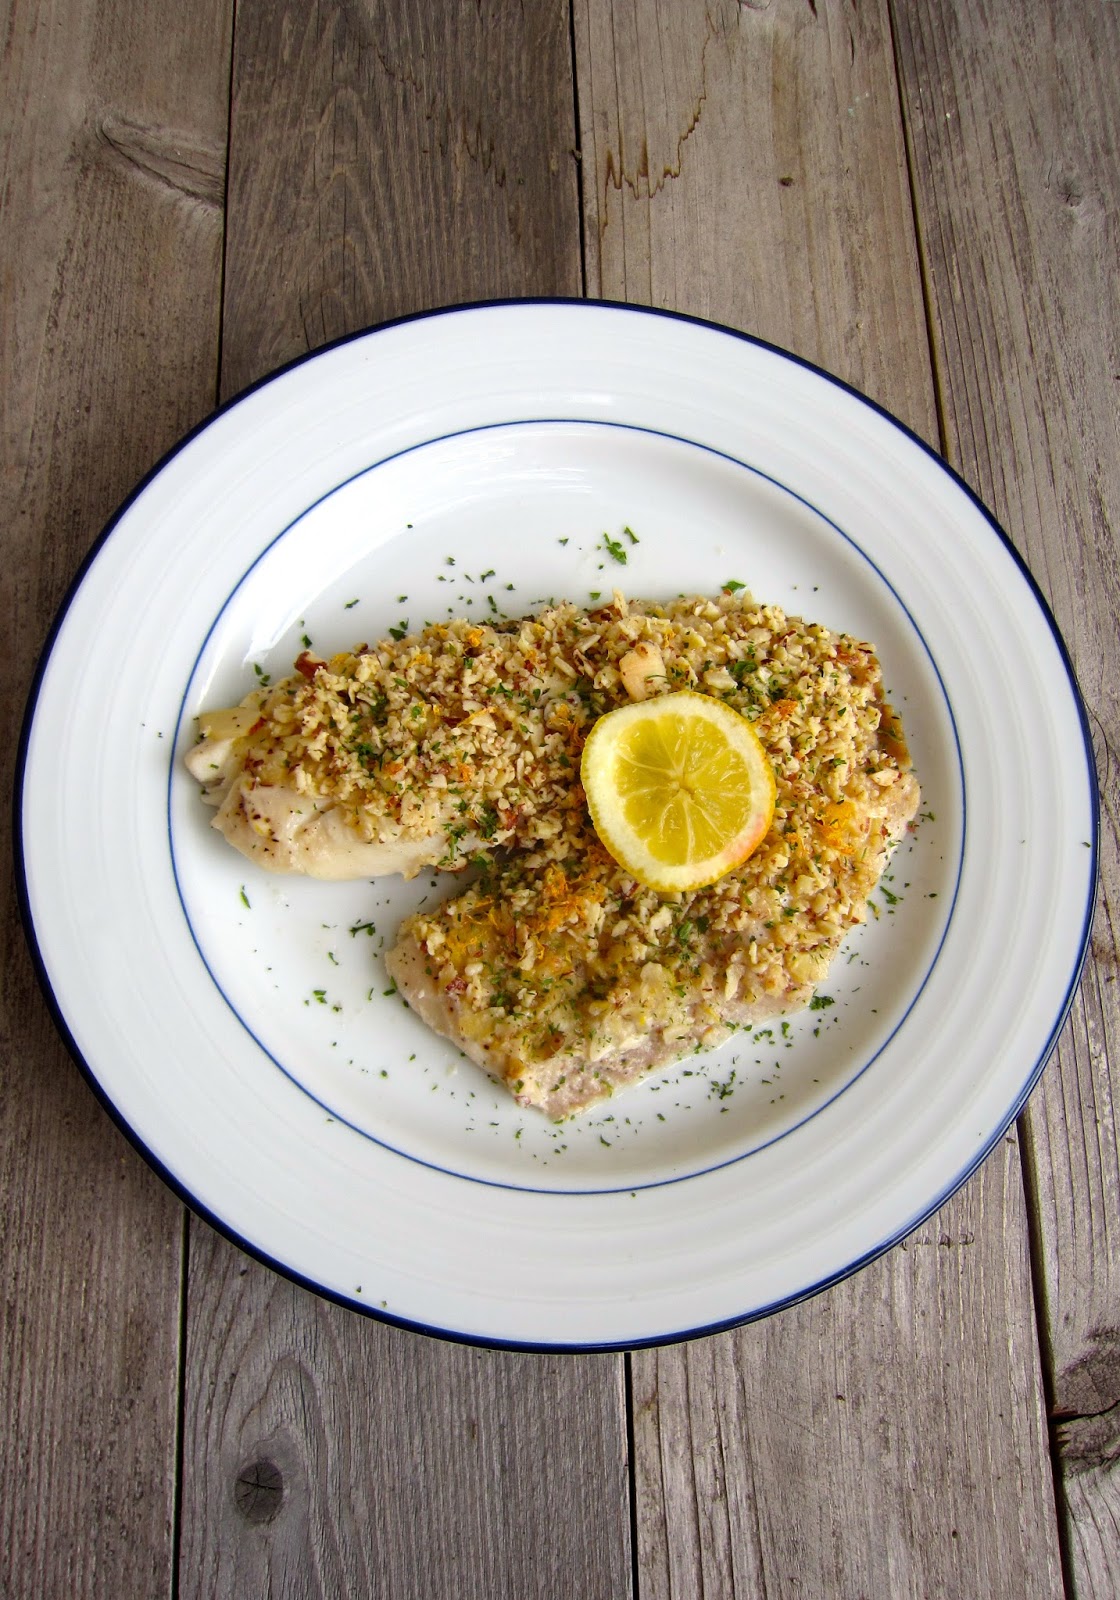 LUBY'S BAKED FISH ALMONDINE MAKEOVER **Giveaway**